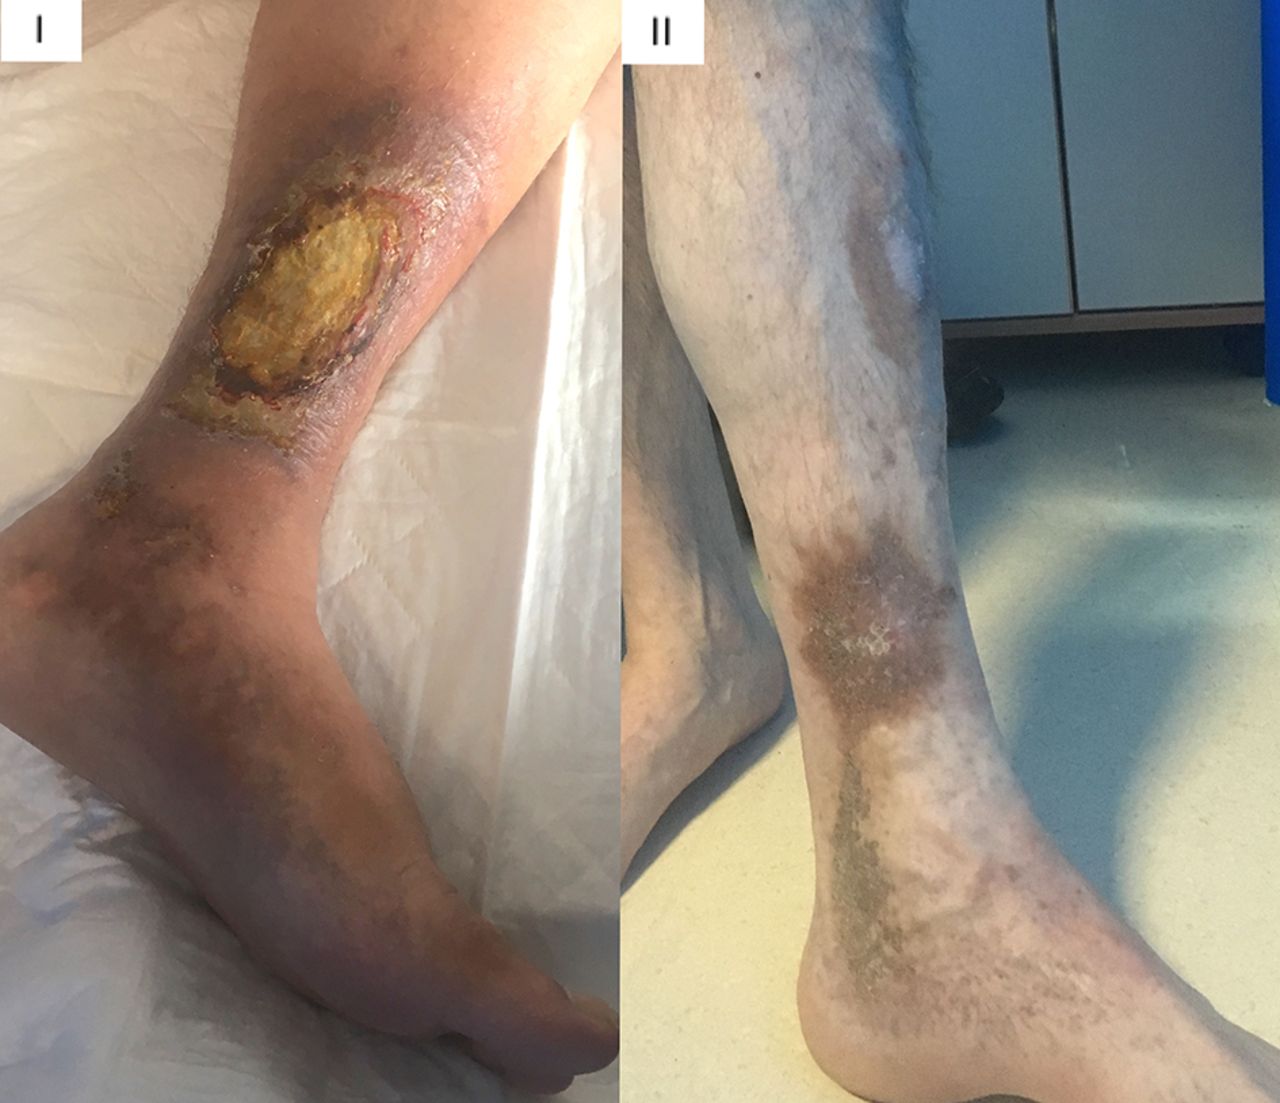 Diagnosis and management of venous leg ulcers